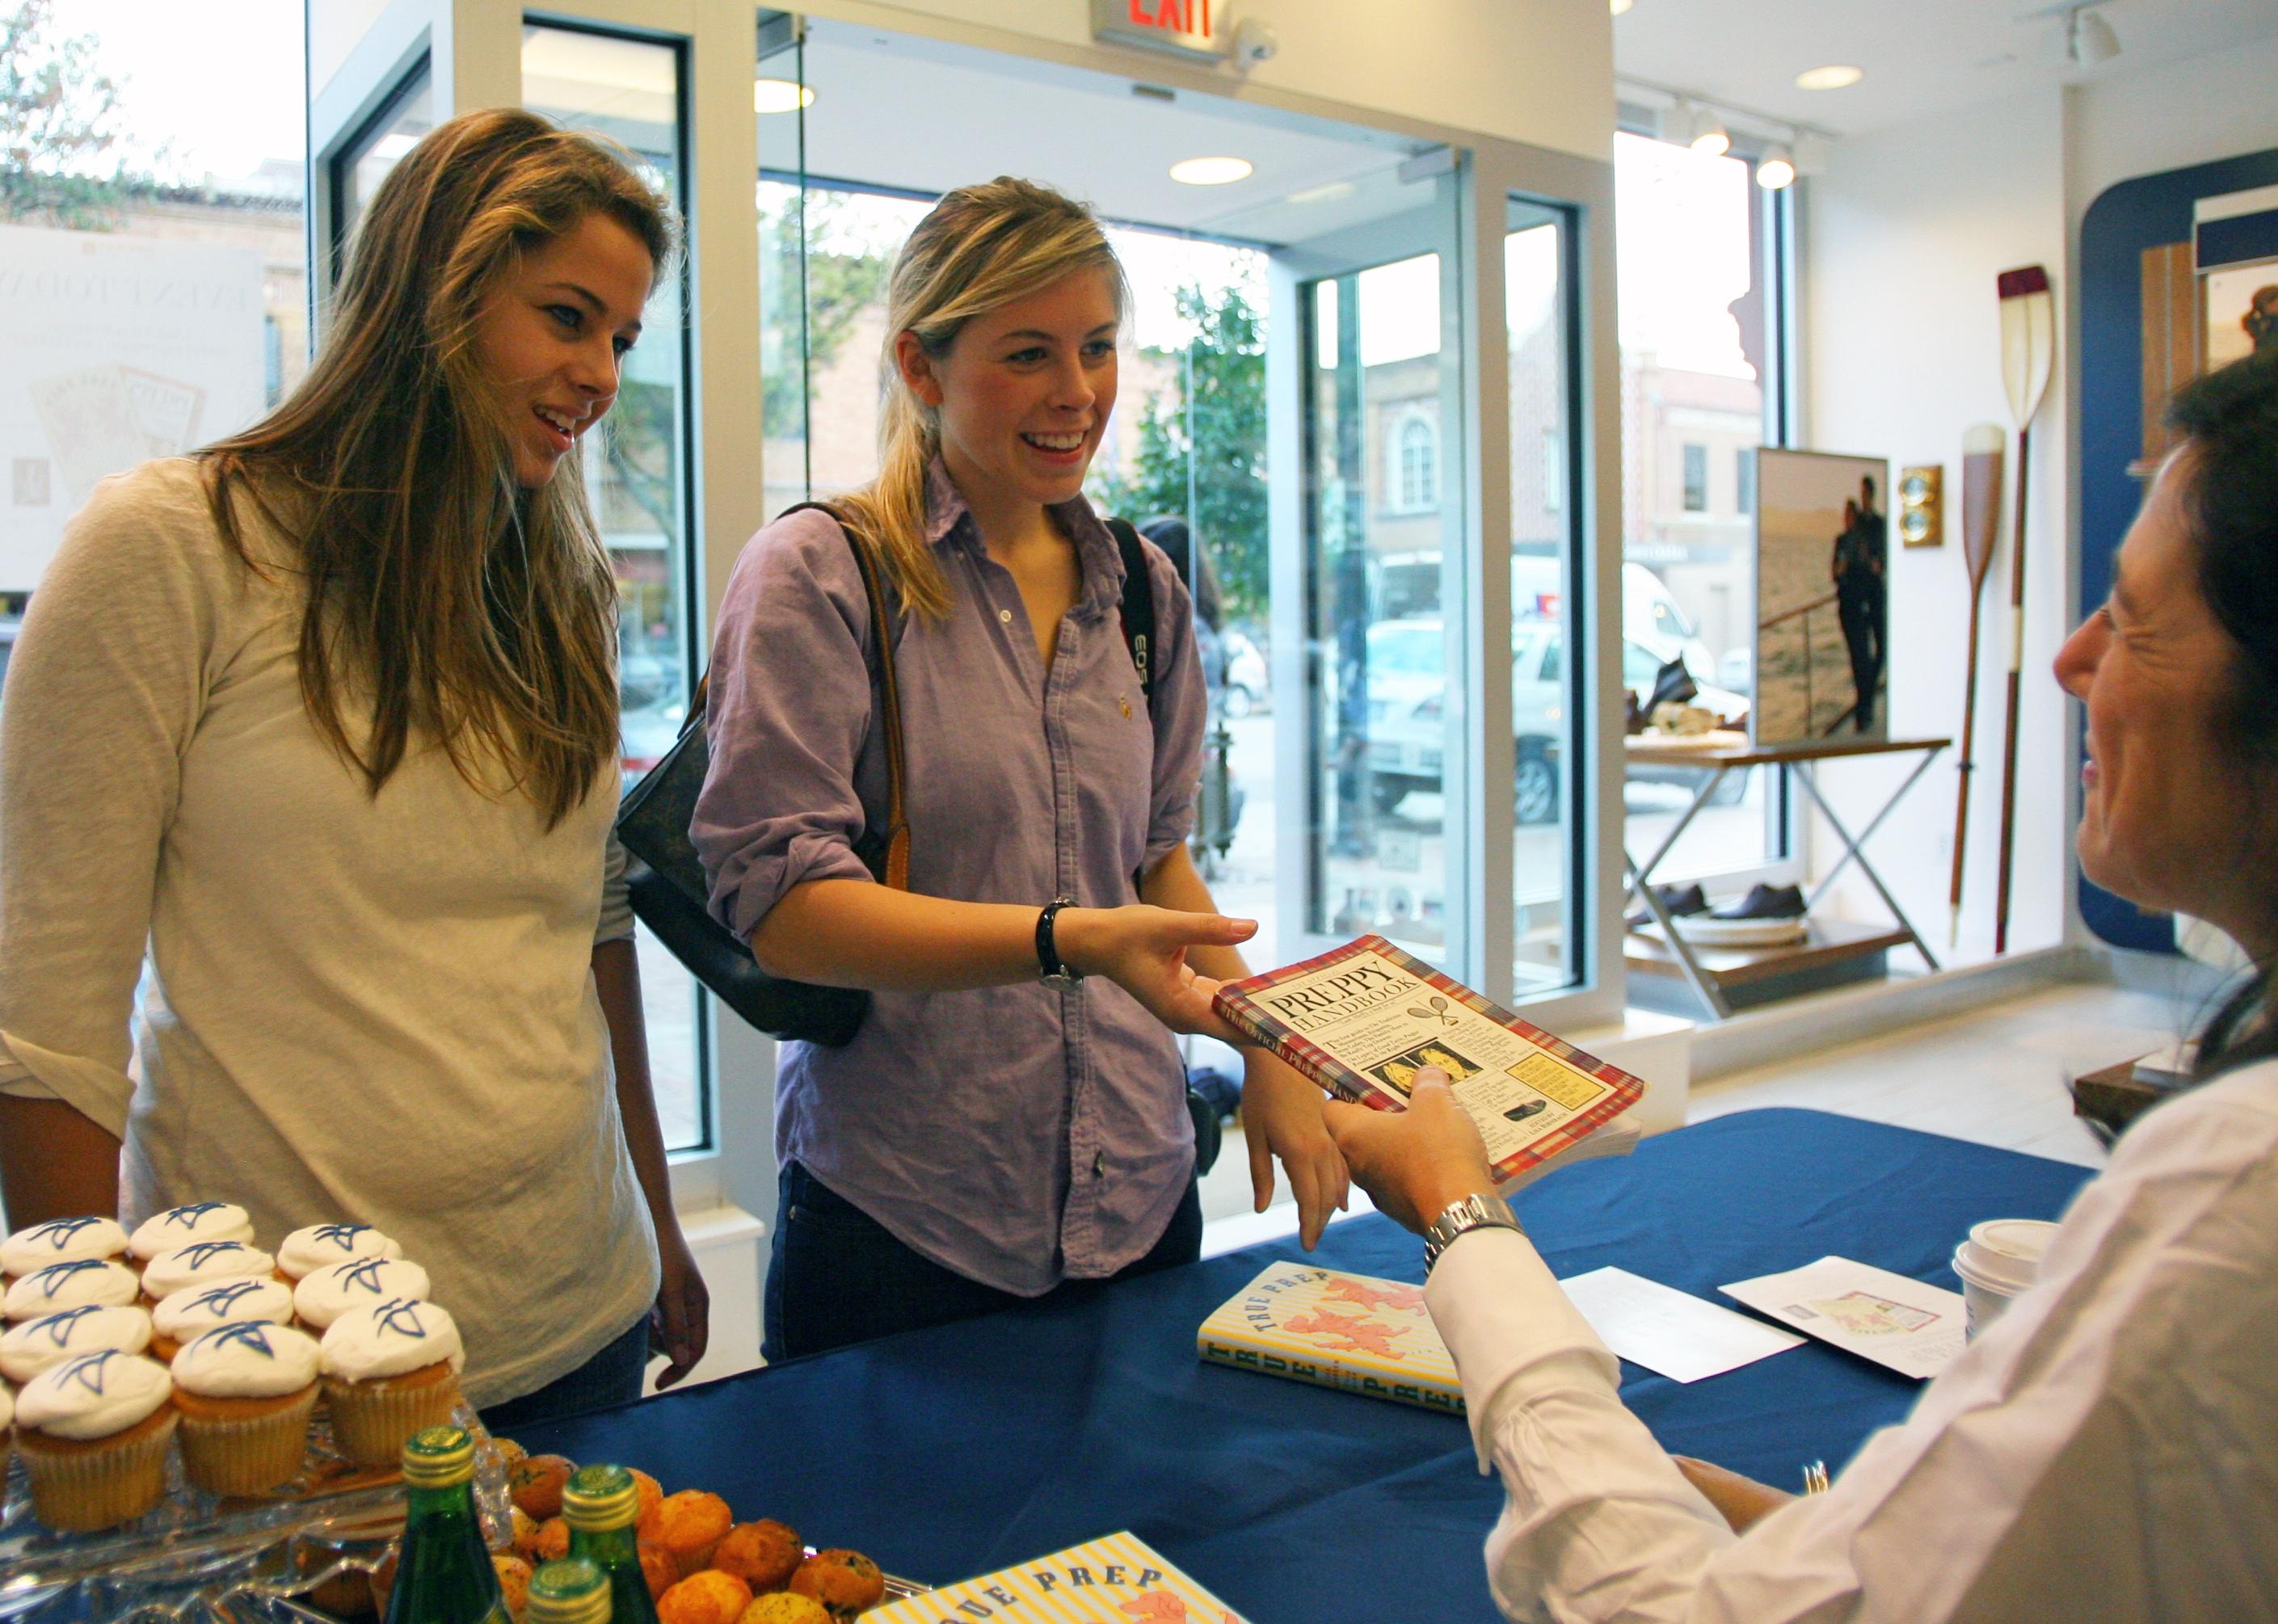  Author Lisa Birnbach signs copies of her book.